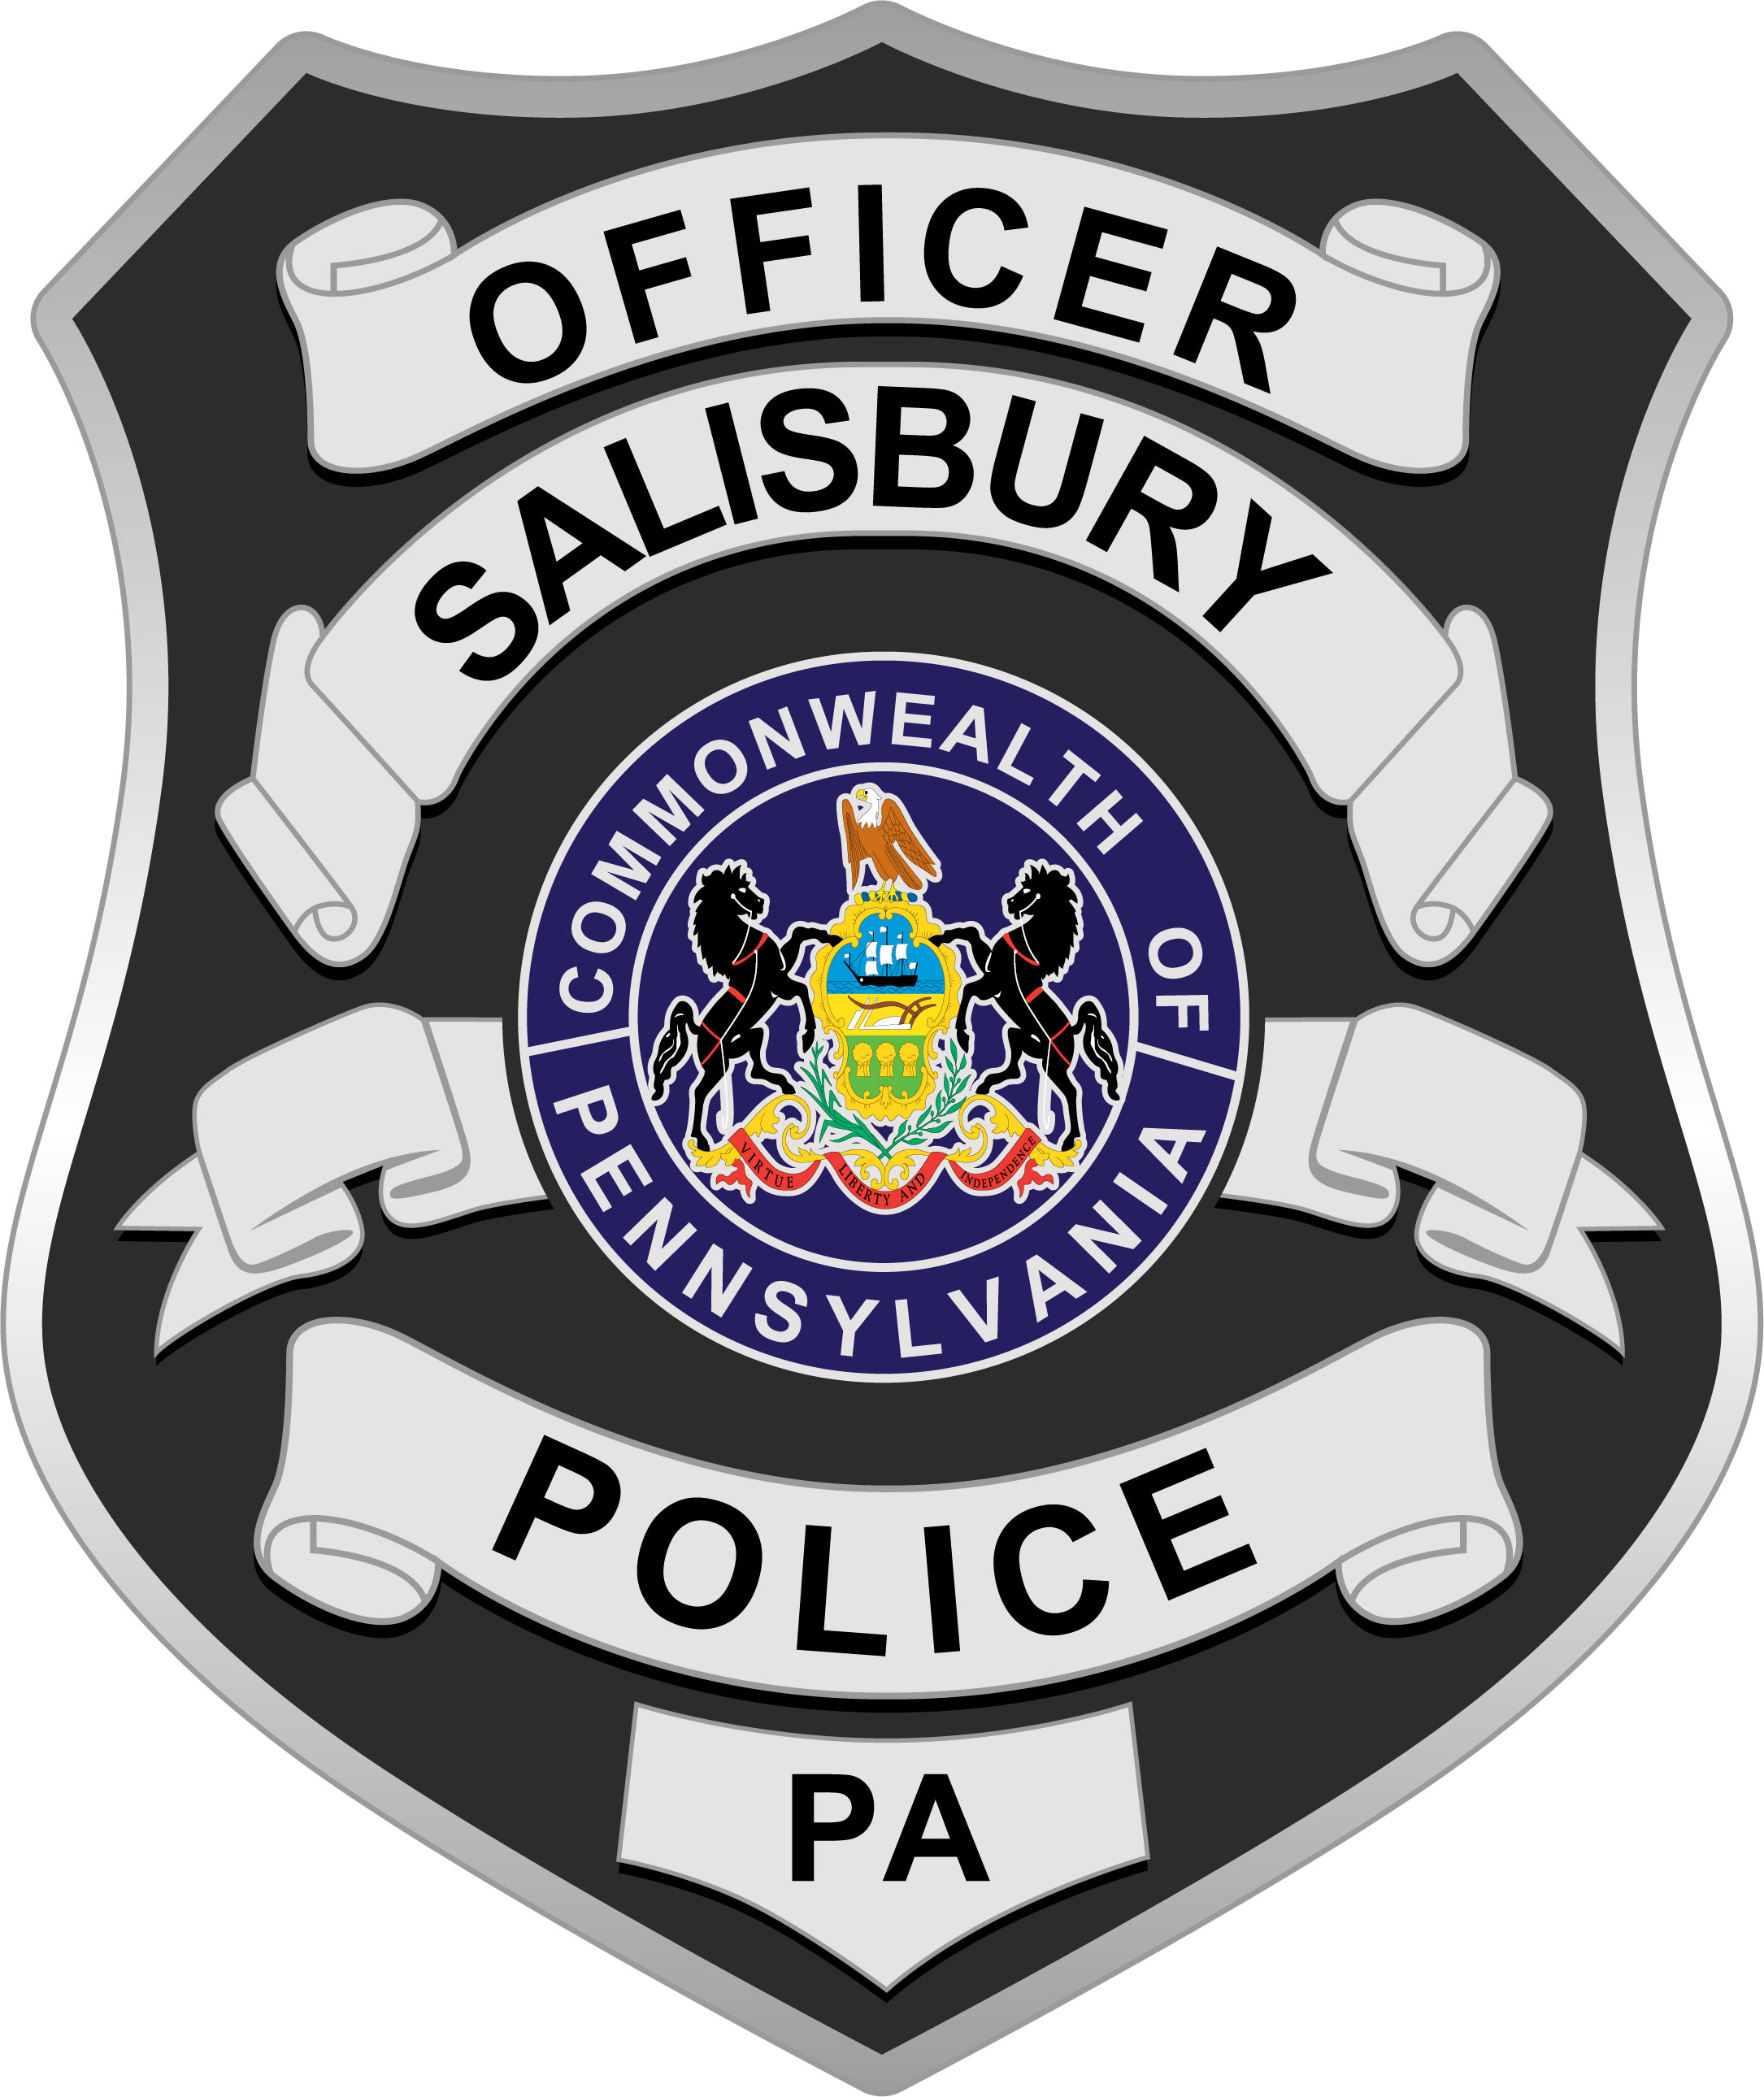 Illustration of the Salisbury Township Pennsylvania Police Department's Official Badge